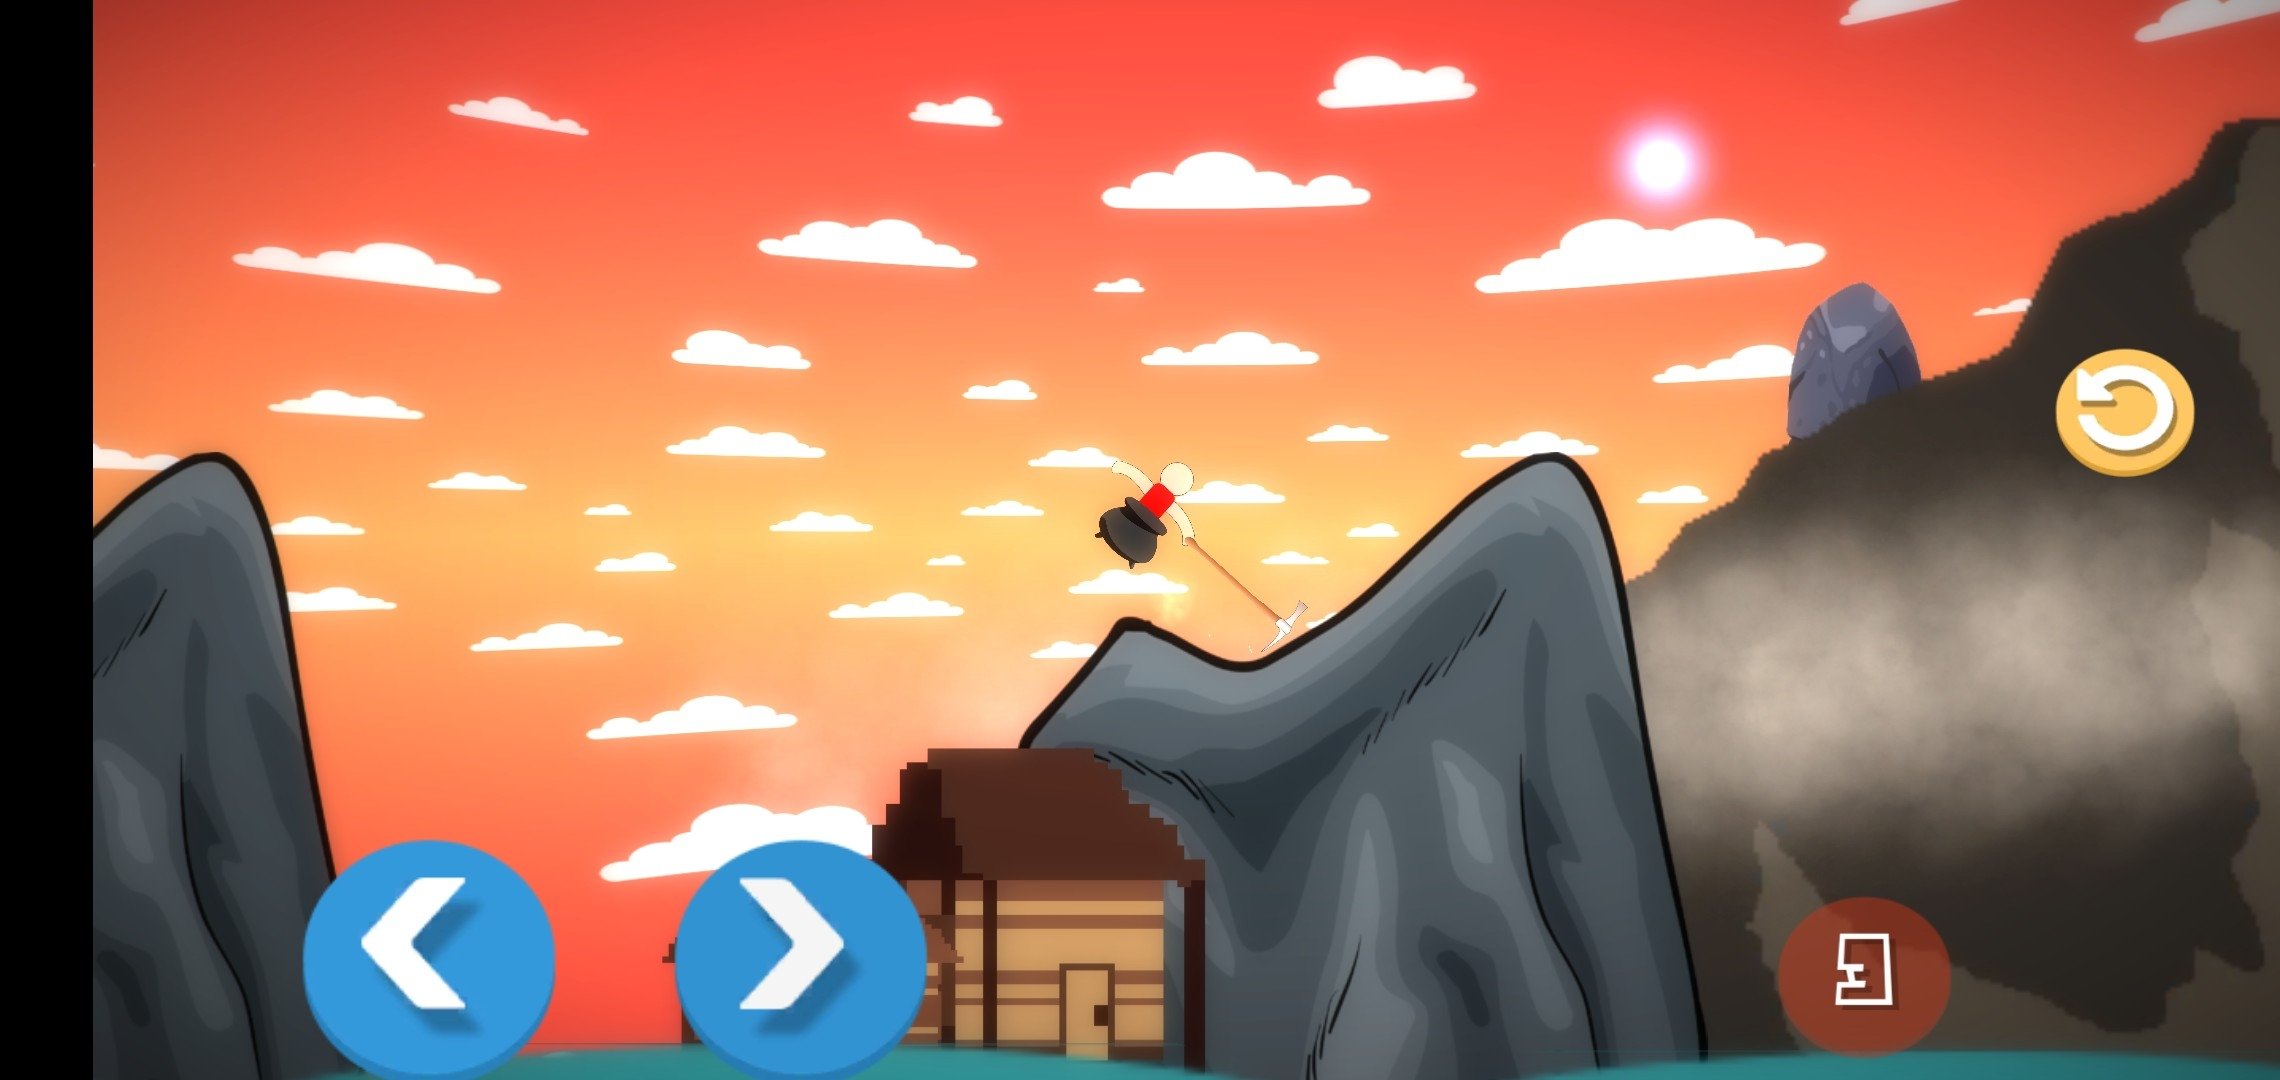 HOW TO DOWNLOAD GETTING OVER IT [ IN 2020 ] FOR FREE ON ANDROID MOBILE